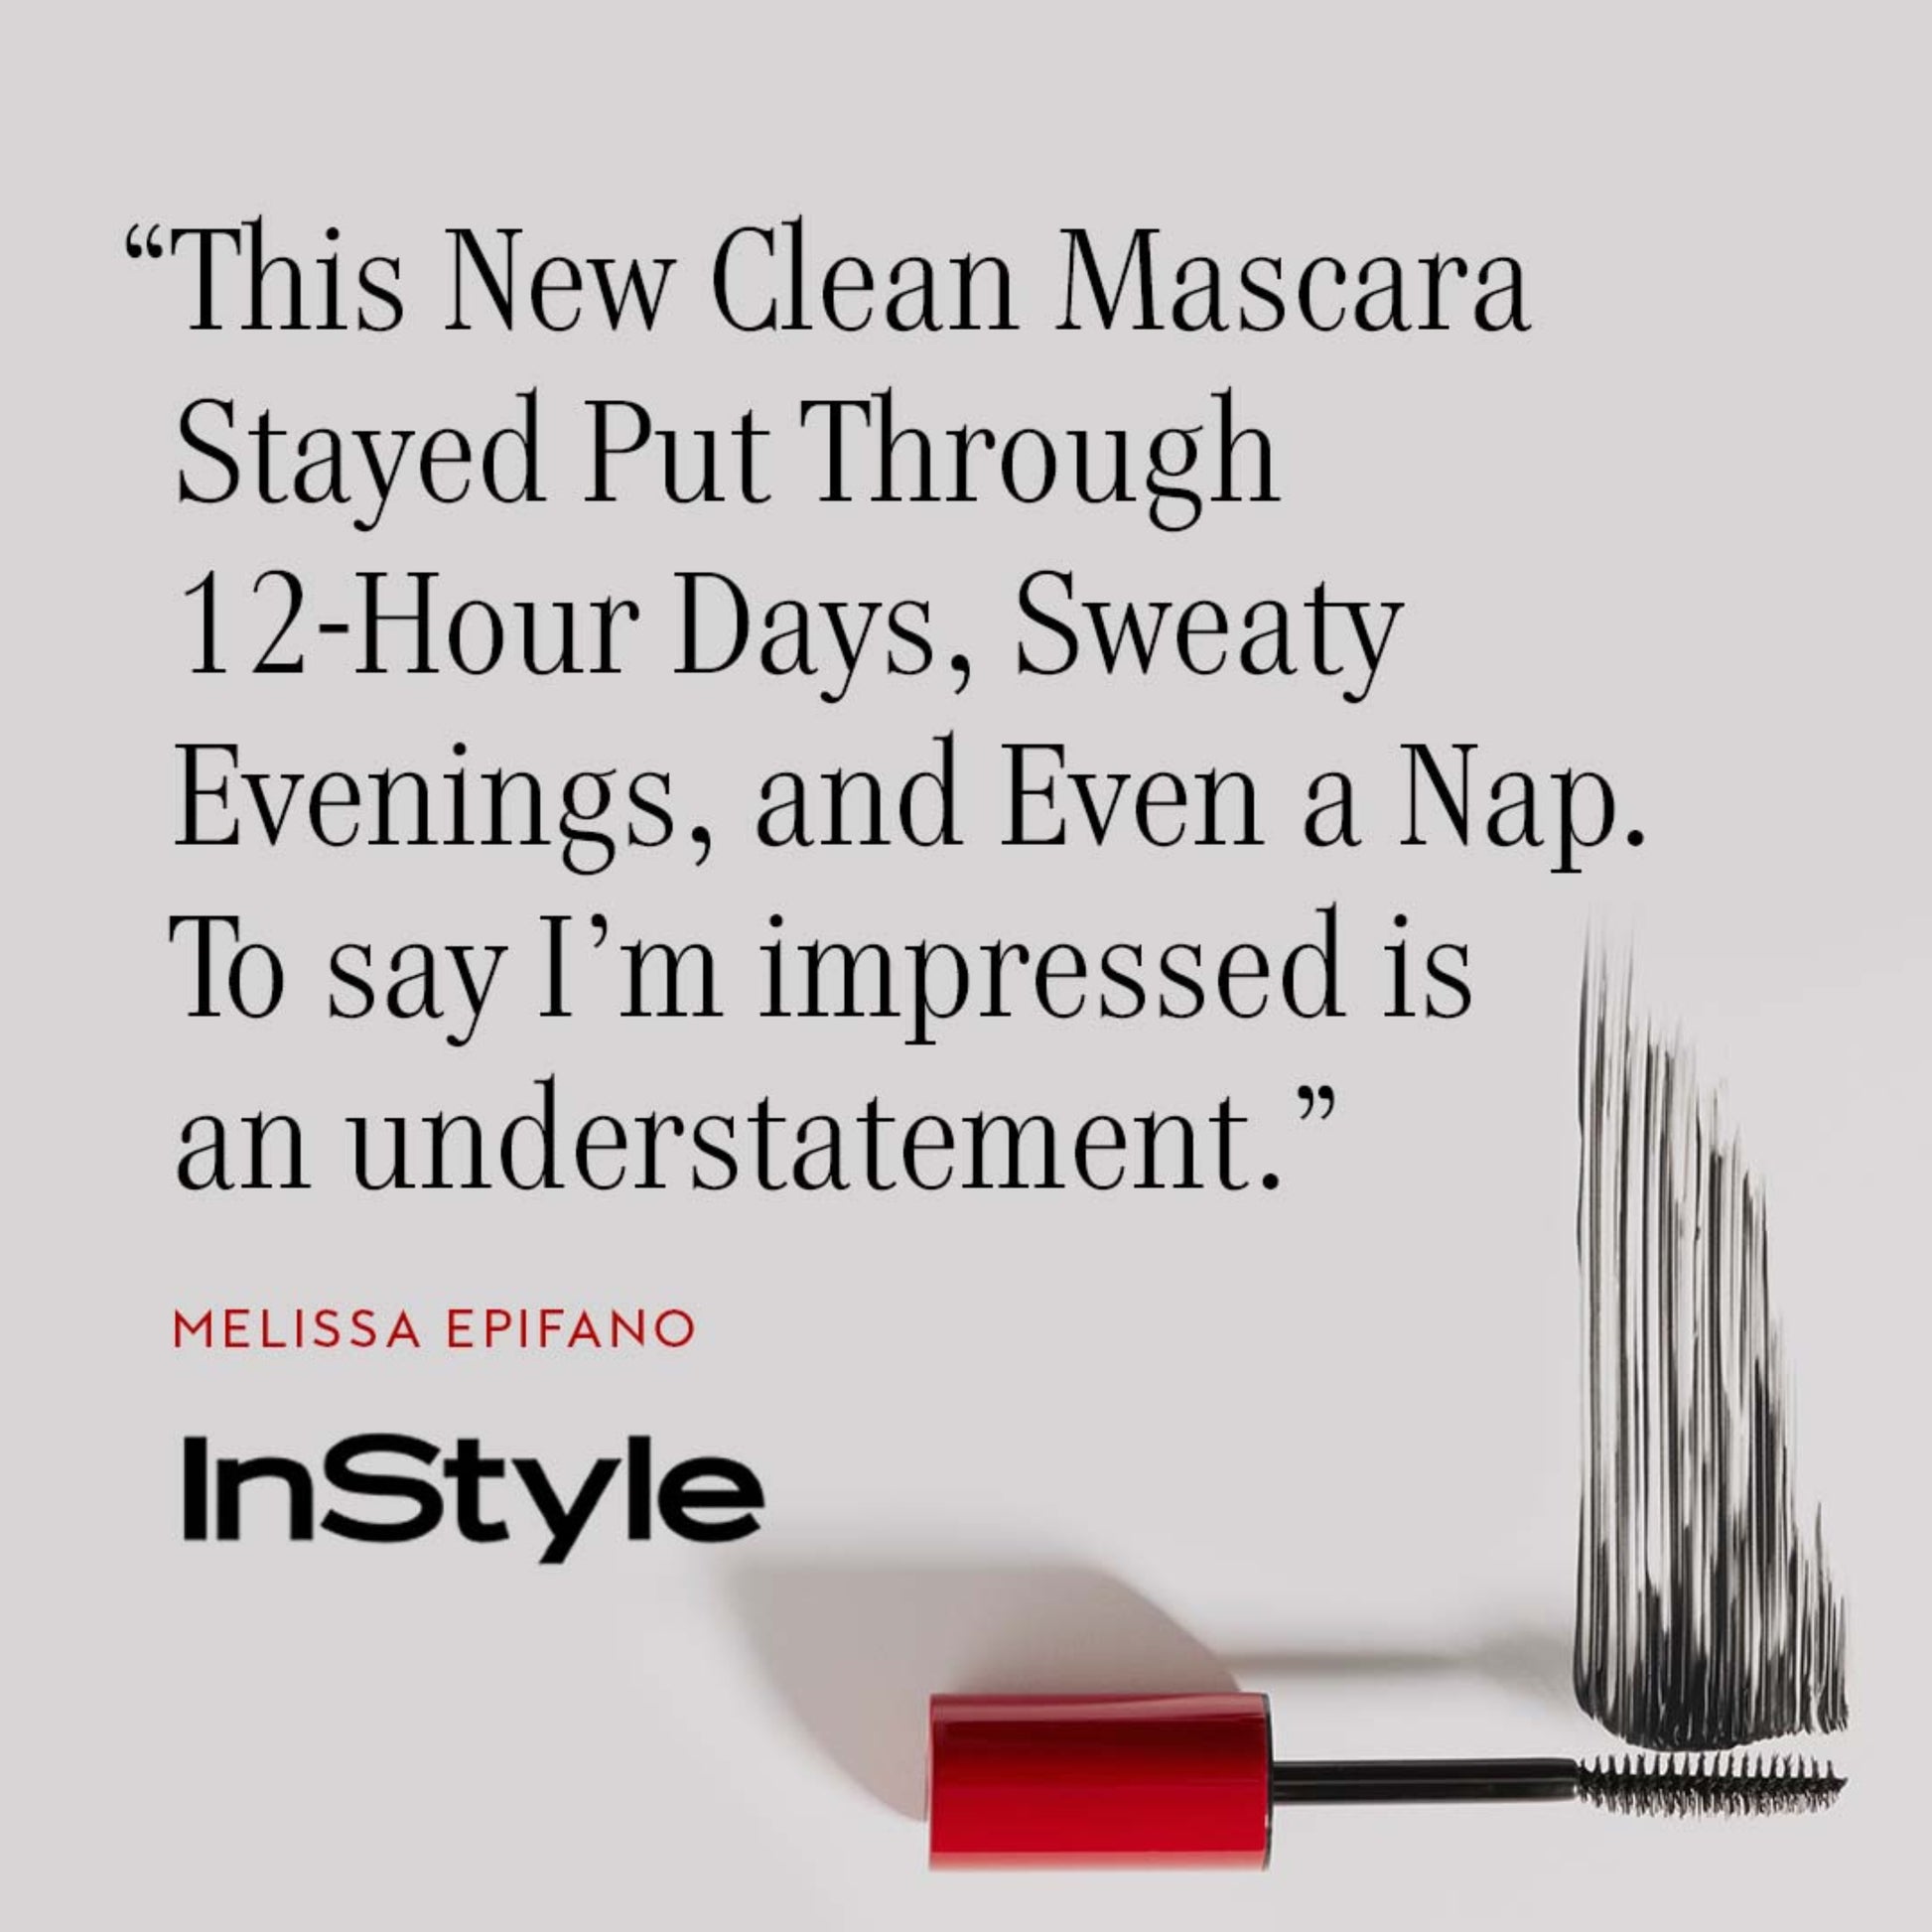 graphic of a quote, saying “this new clean mascara stayed put through 12-hour days, sweaty evenings, and even a nap. to say i’m impressed is an understatement” from melissa epifano of instyle. 